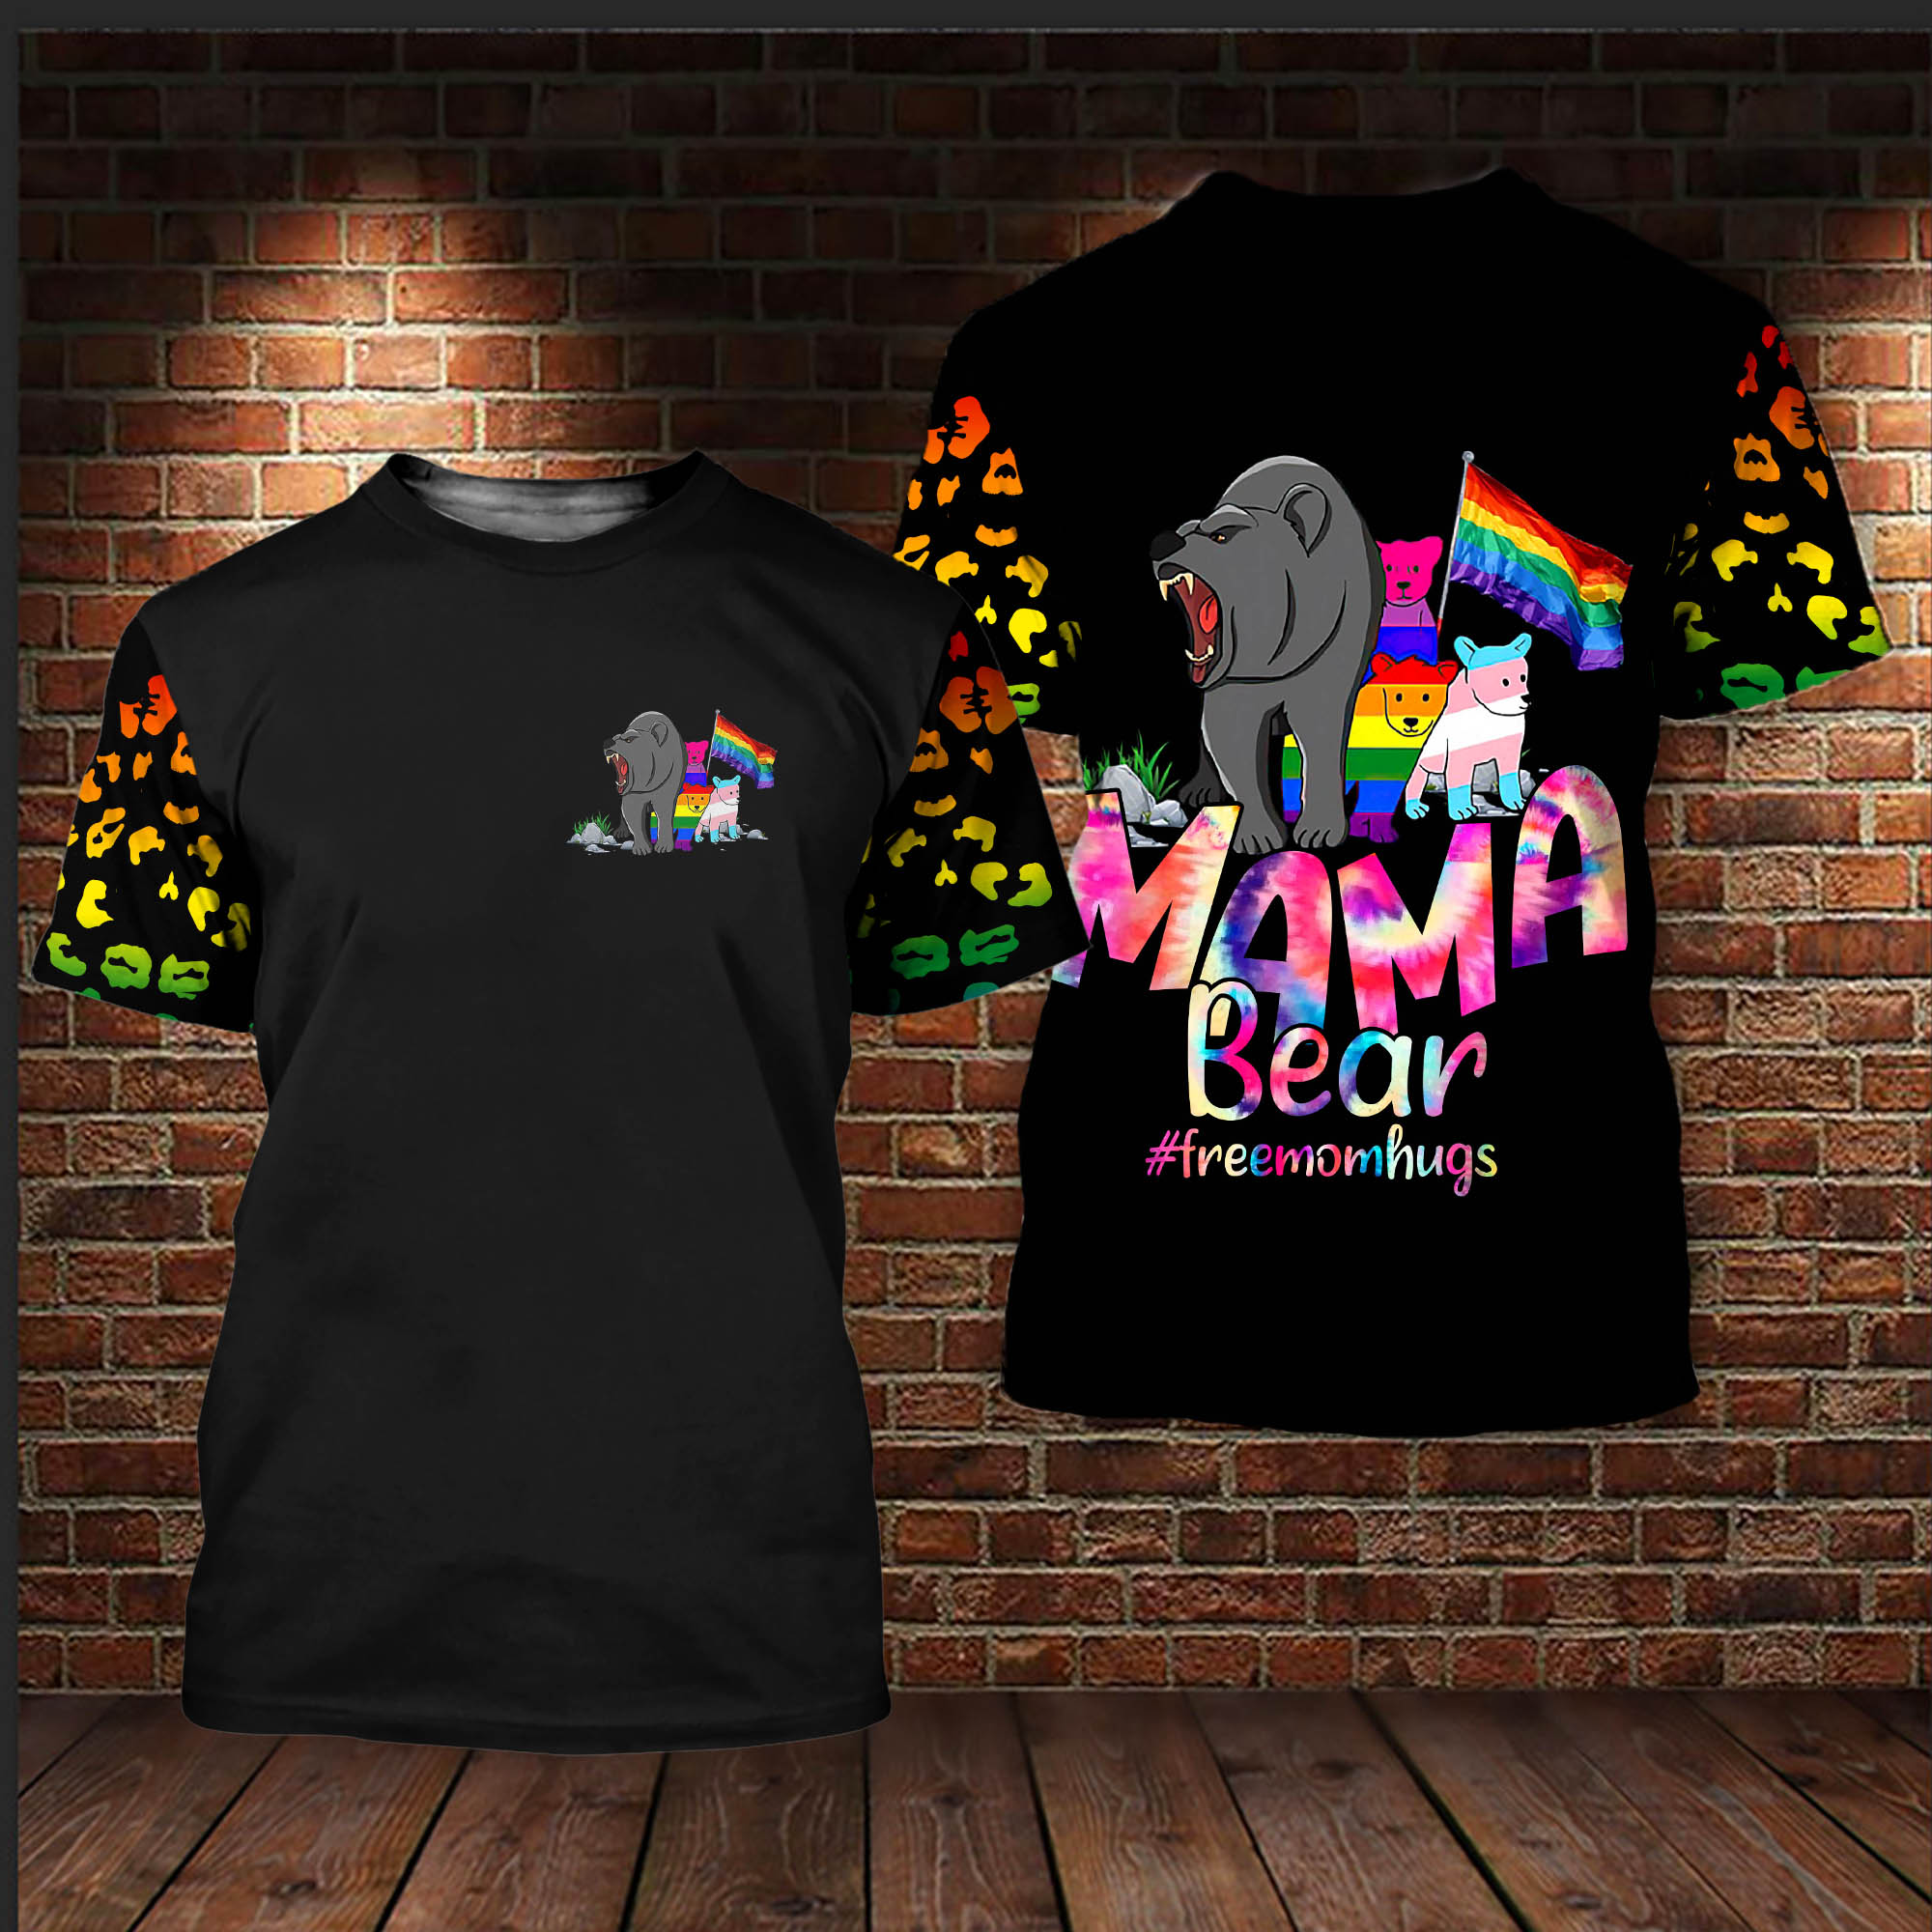 LGBT Mama Bear Free Mom Hugs 3D All Over Printed Shirt For LGBT Community/ Gift For LGBT Pride Month